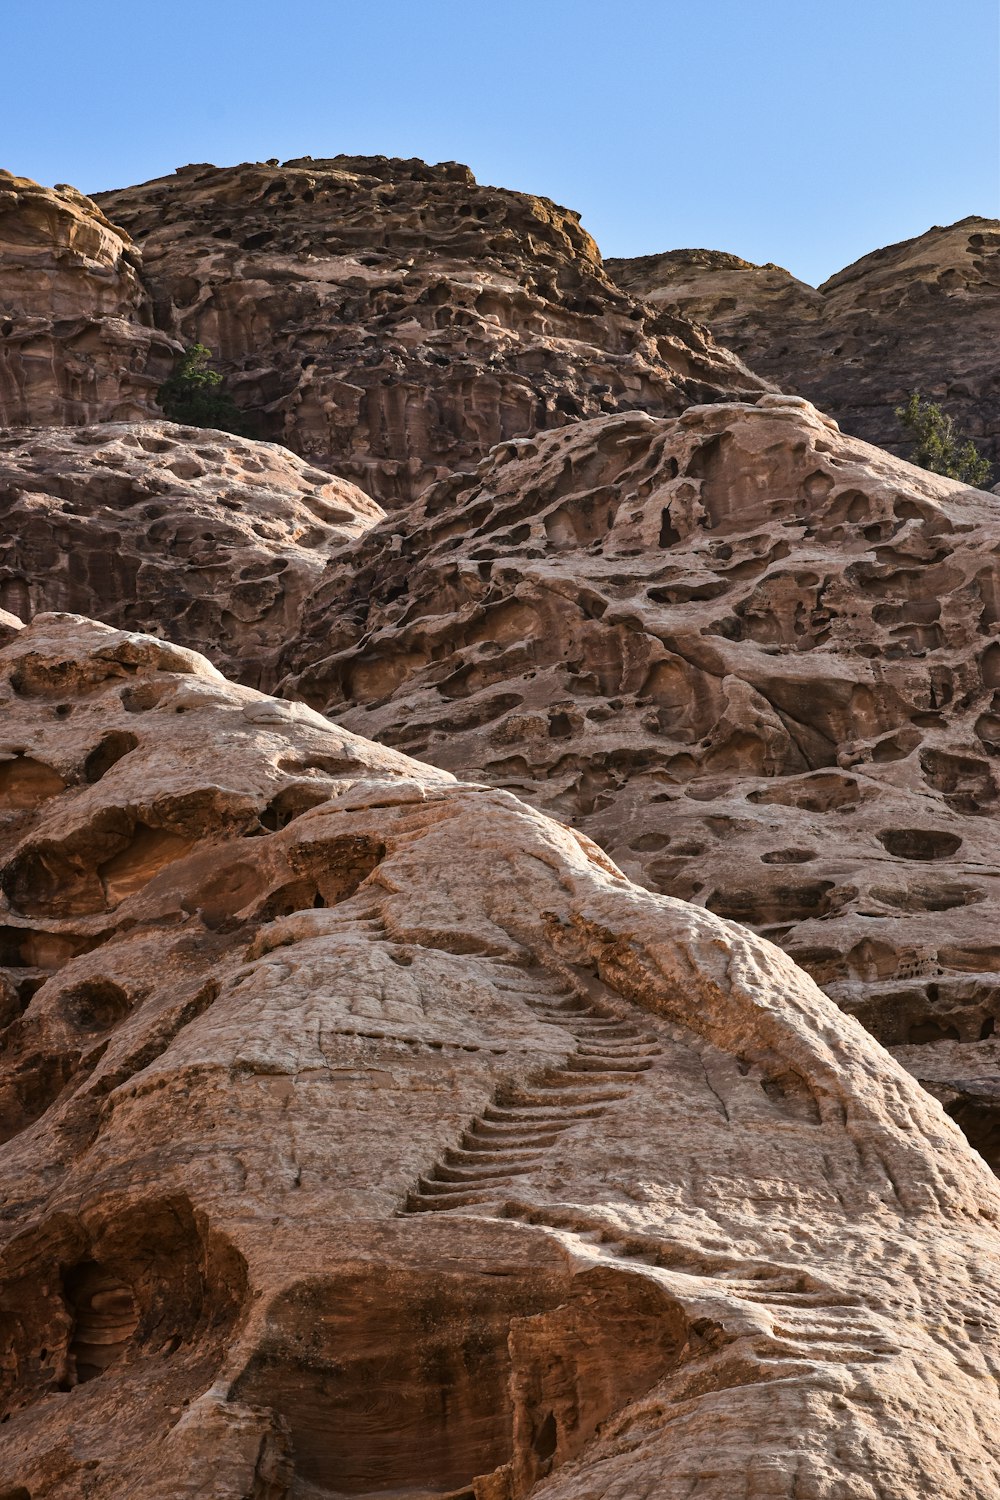 a rock formation with steps carved into it